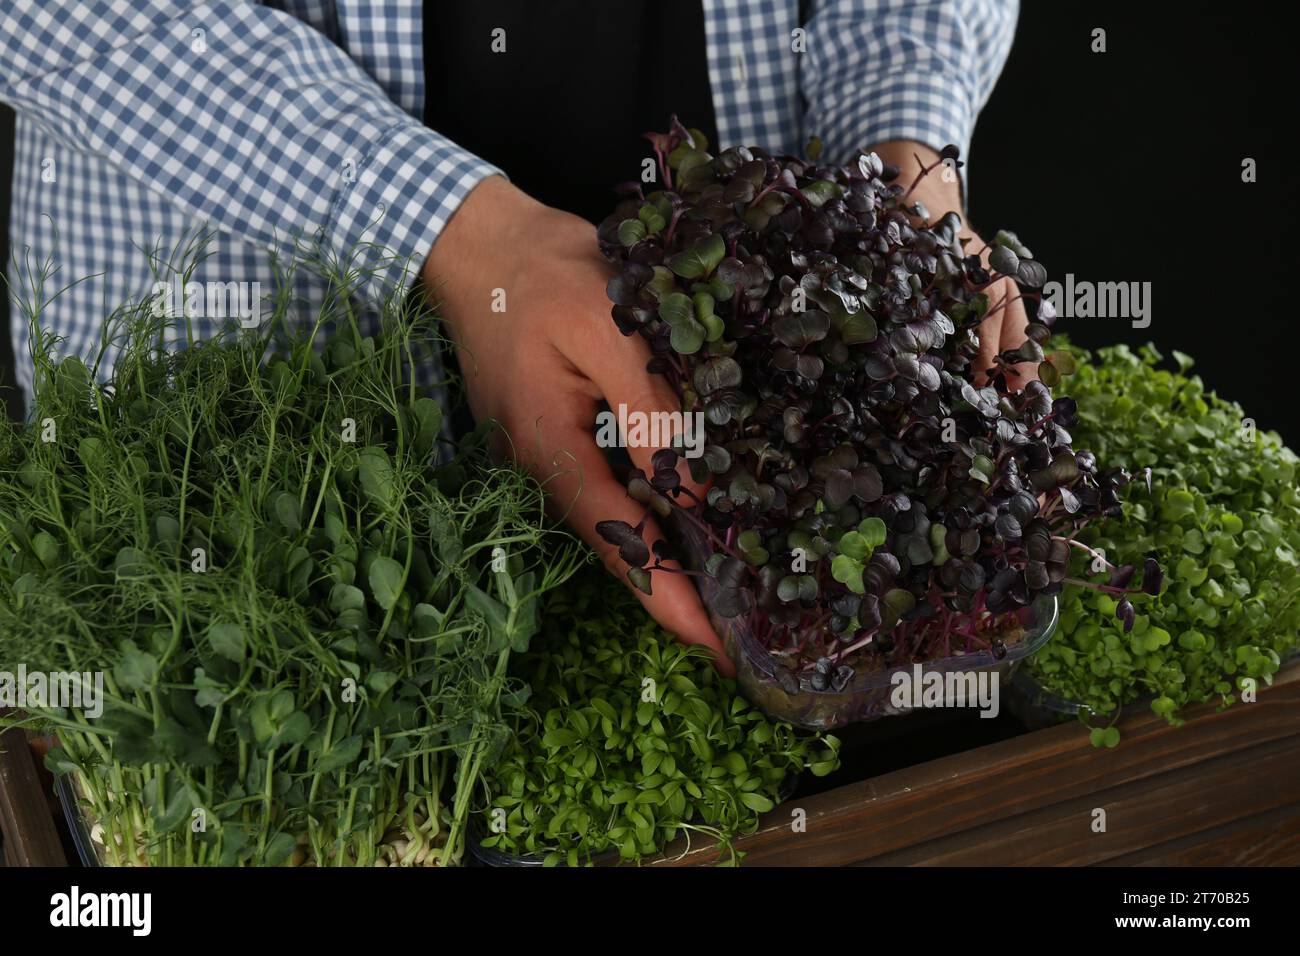 Man with wooden crate of different fresh microgreens on black background, closeup Stock Photo